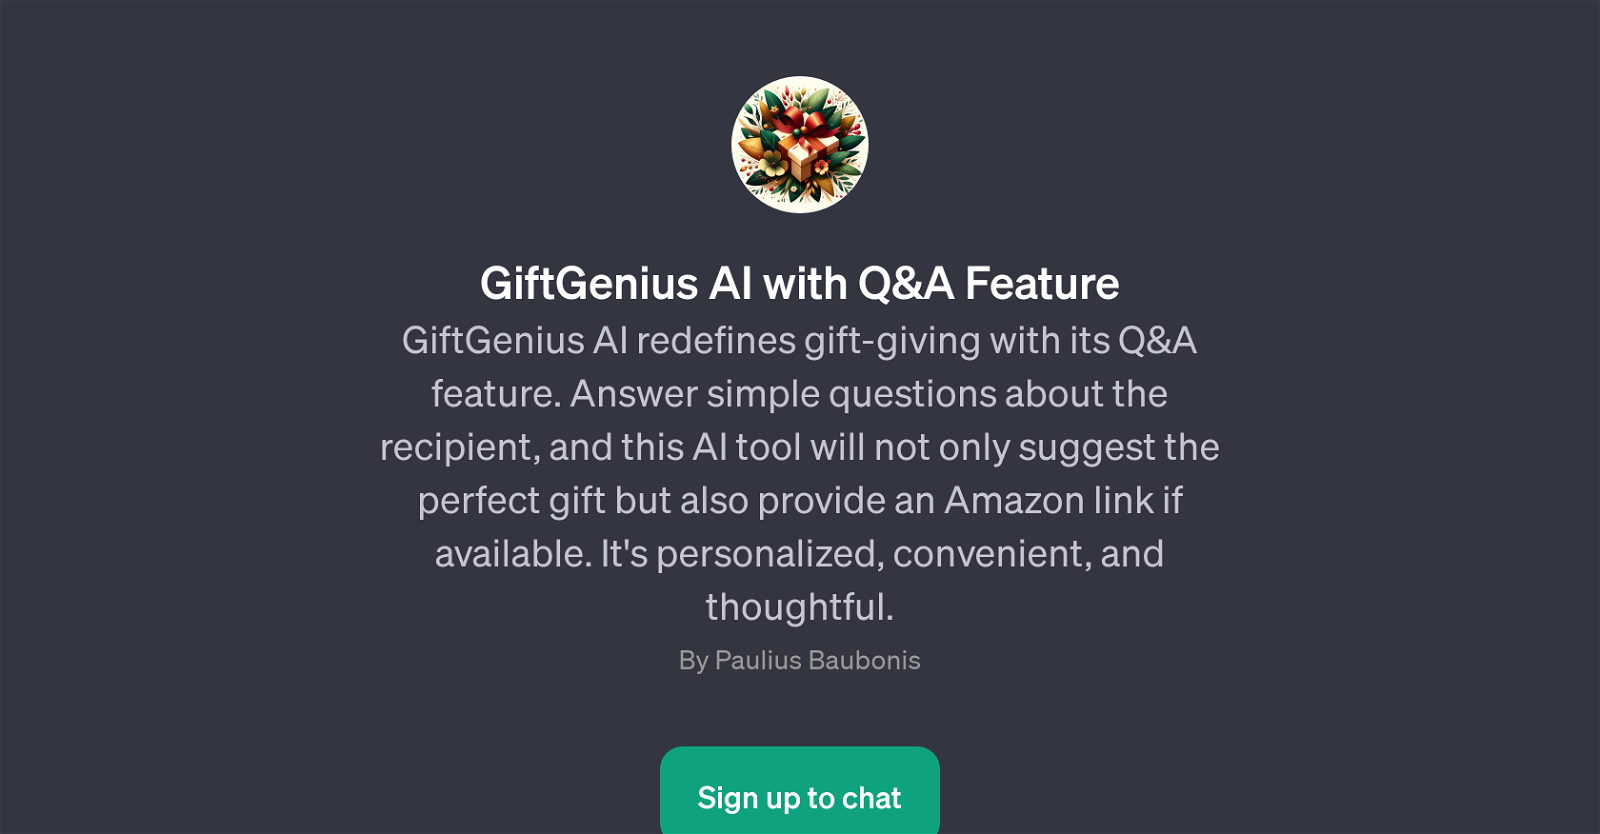 GiftGenius AI with Q&A Feature website